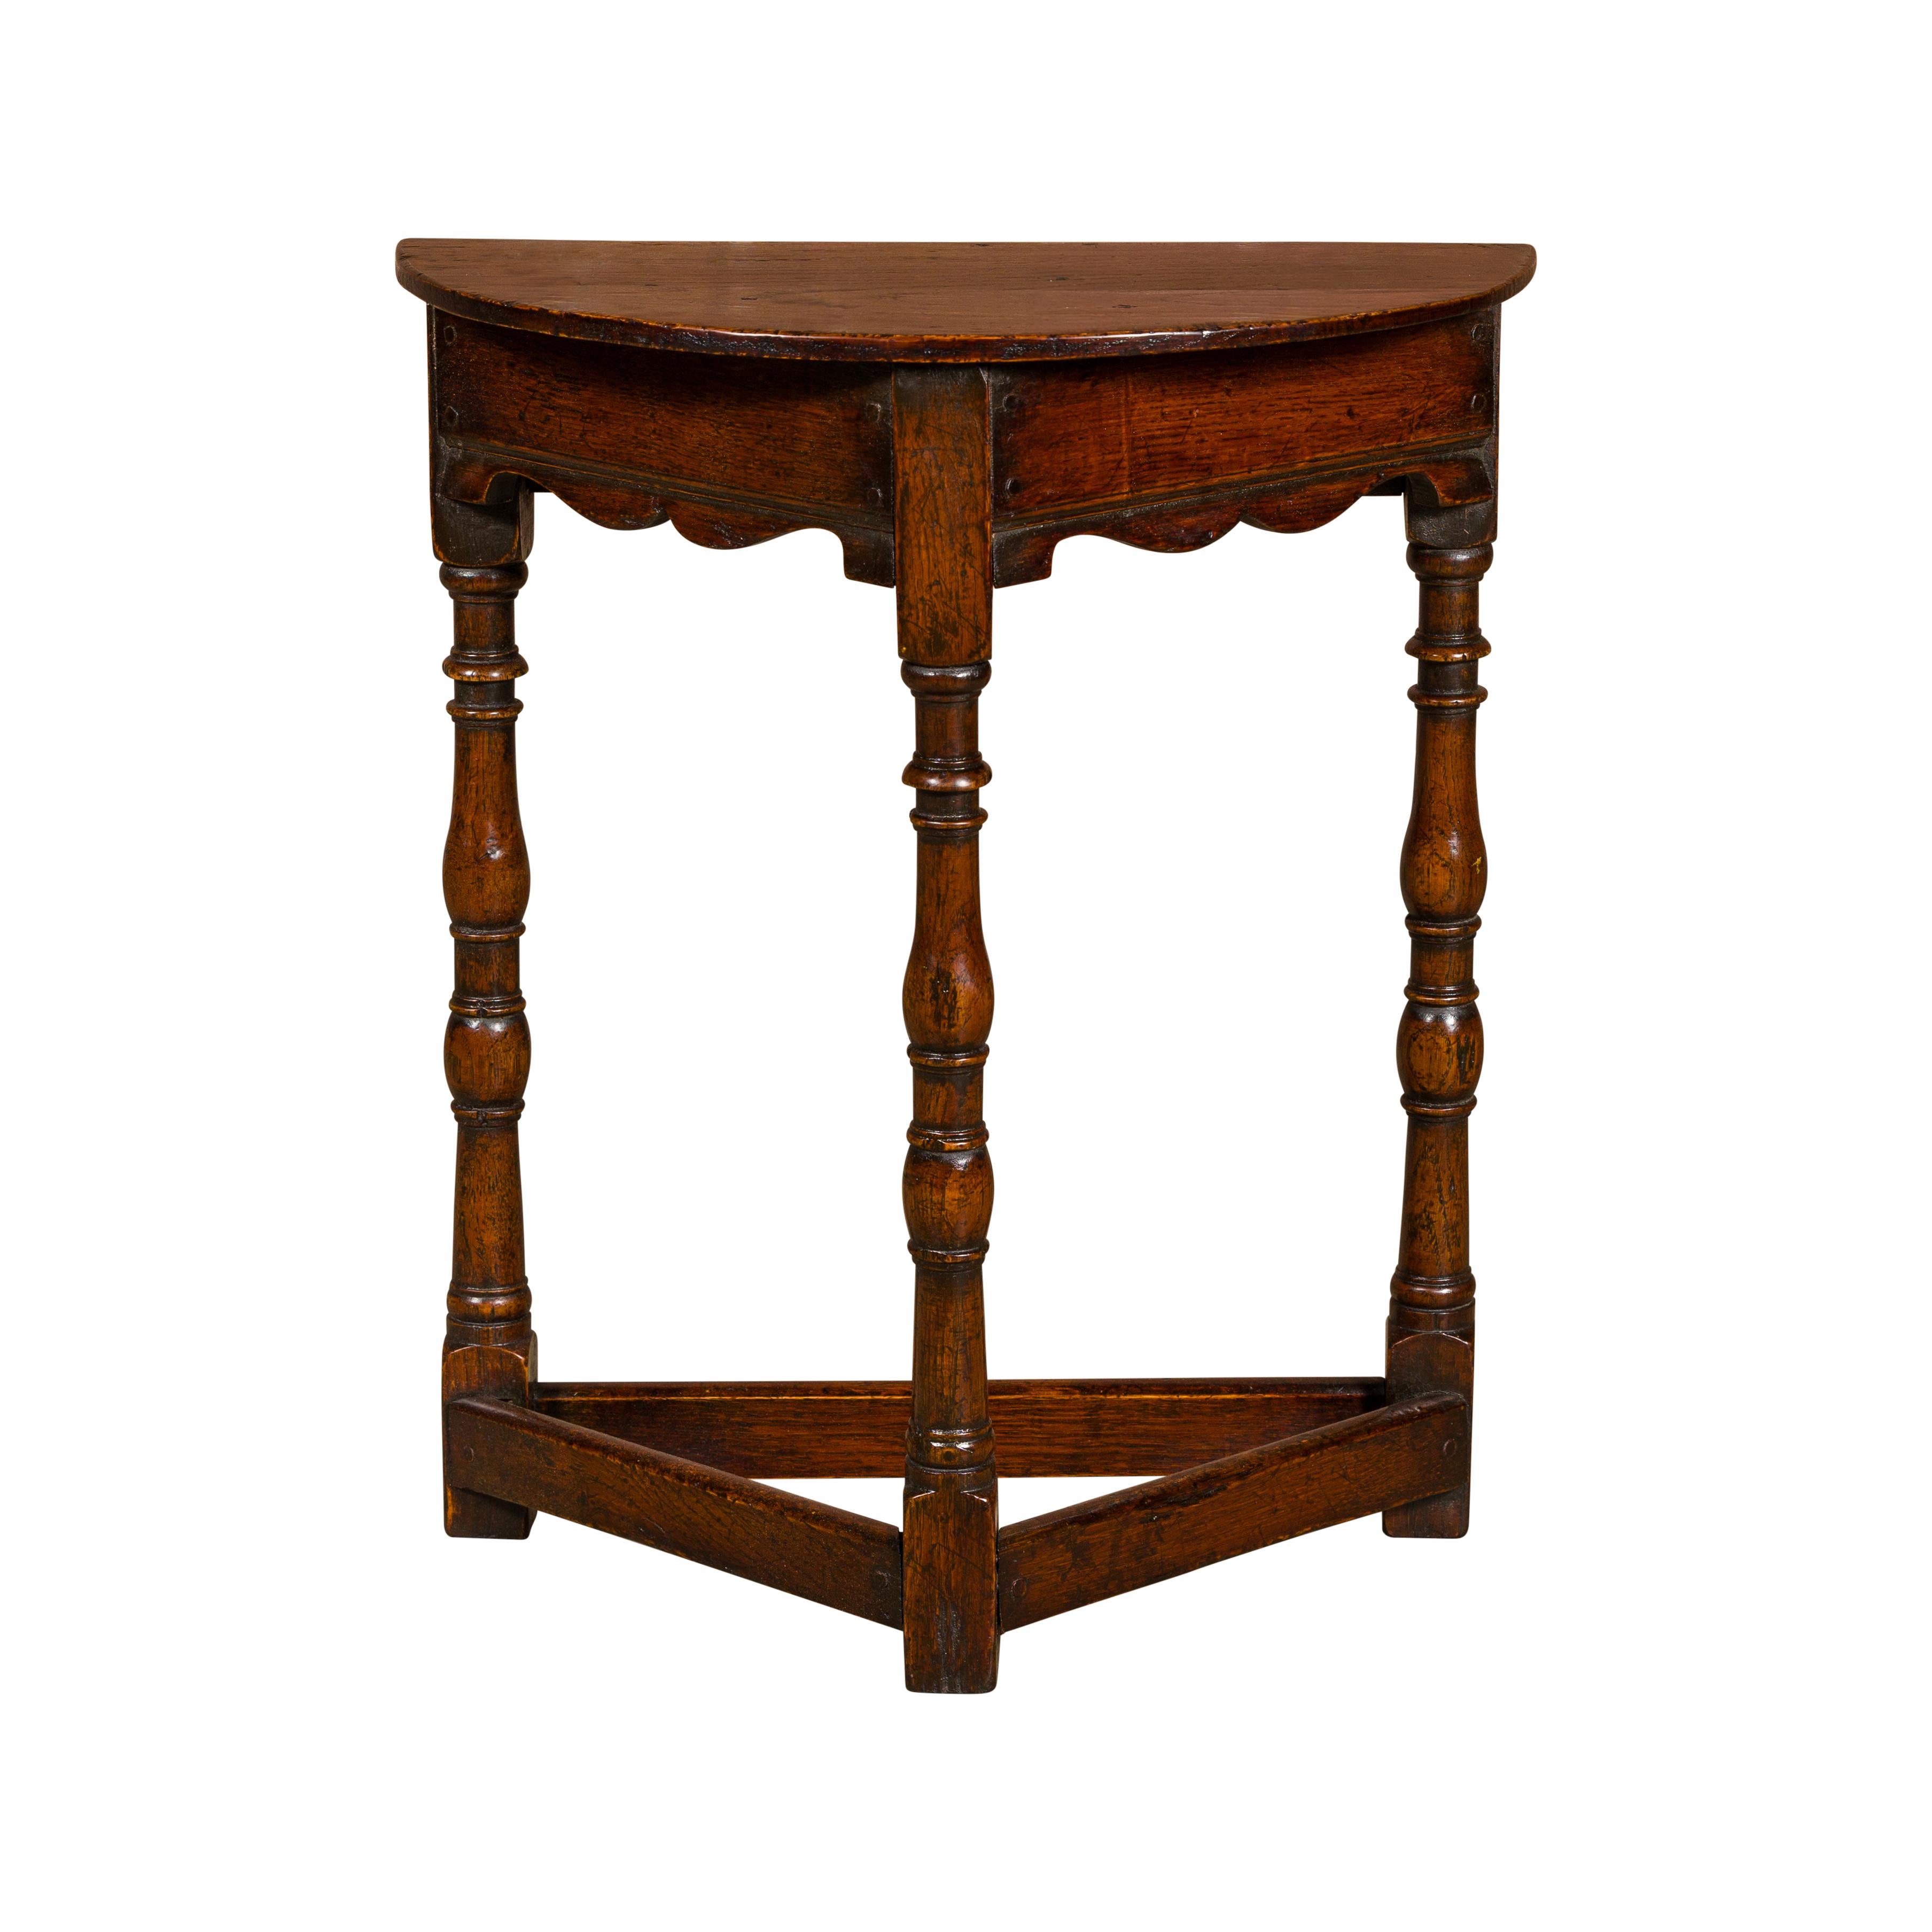 English 19th Century Small Oak Demi-Lune Table with Turned Legs and Carved Apron 12